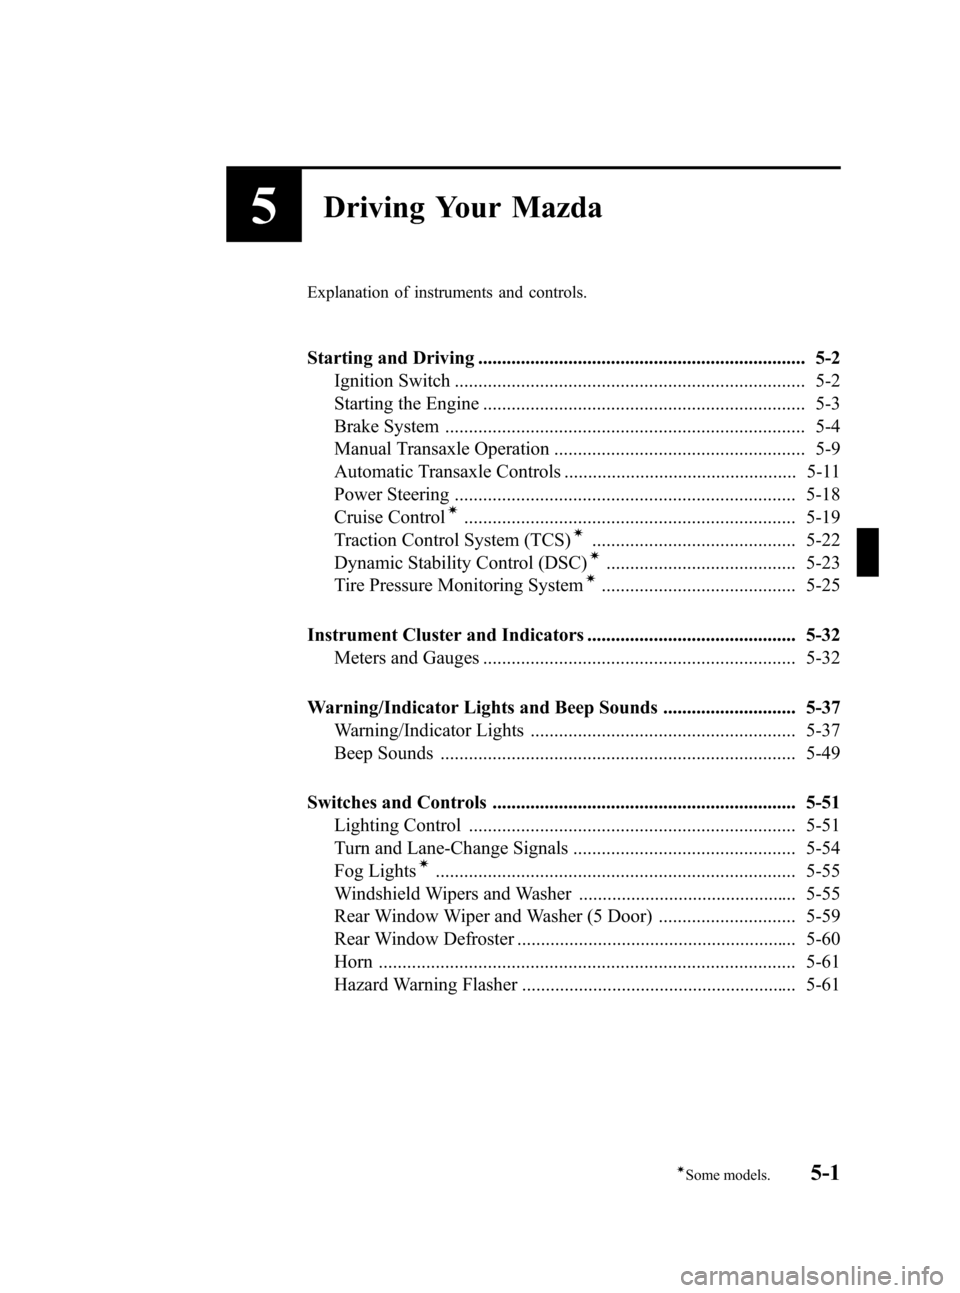 MAZDA MODEL 3 HATCHBACK 2007  Owners Manual (in English) Black plate (123,1)
5Driving Your Mazda
Explanation of instruments and controls.
Starting and Driving ..................................................................... 5-2
Ignition Switch ........